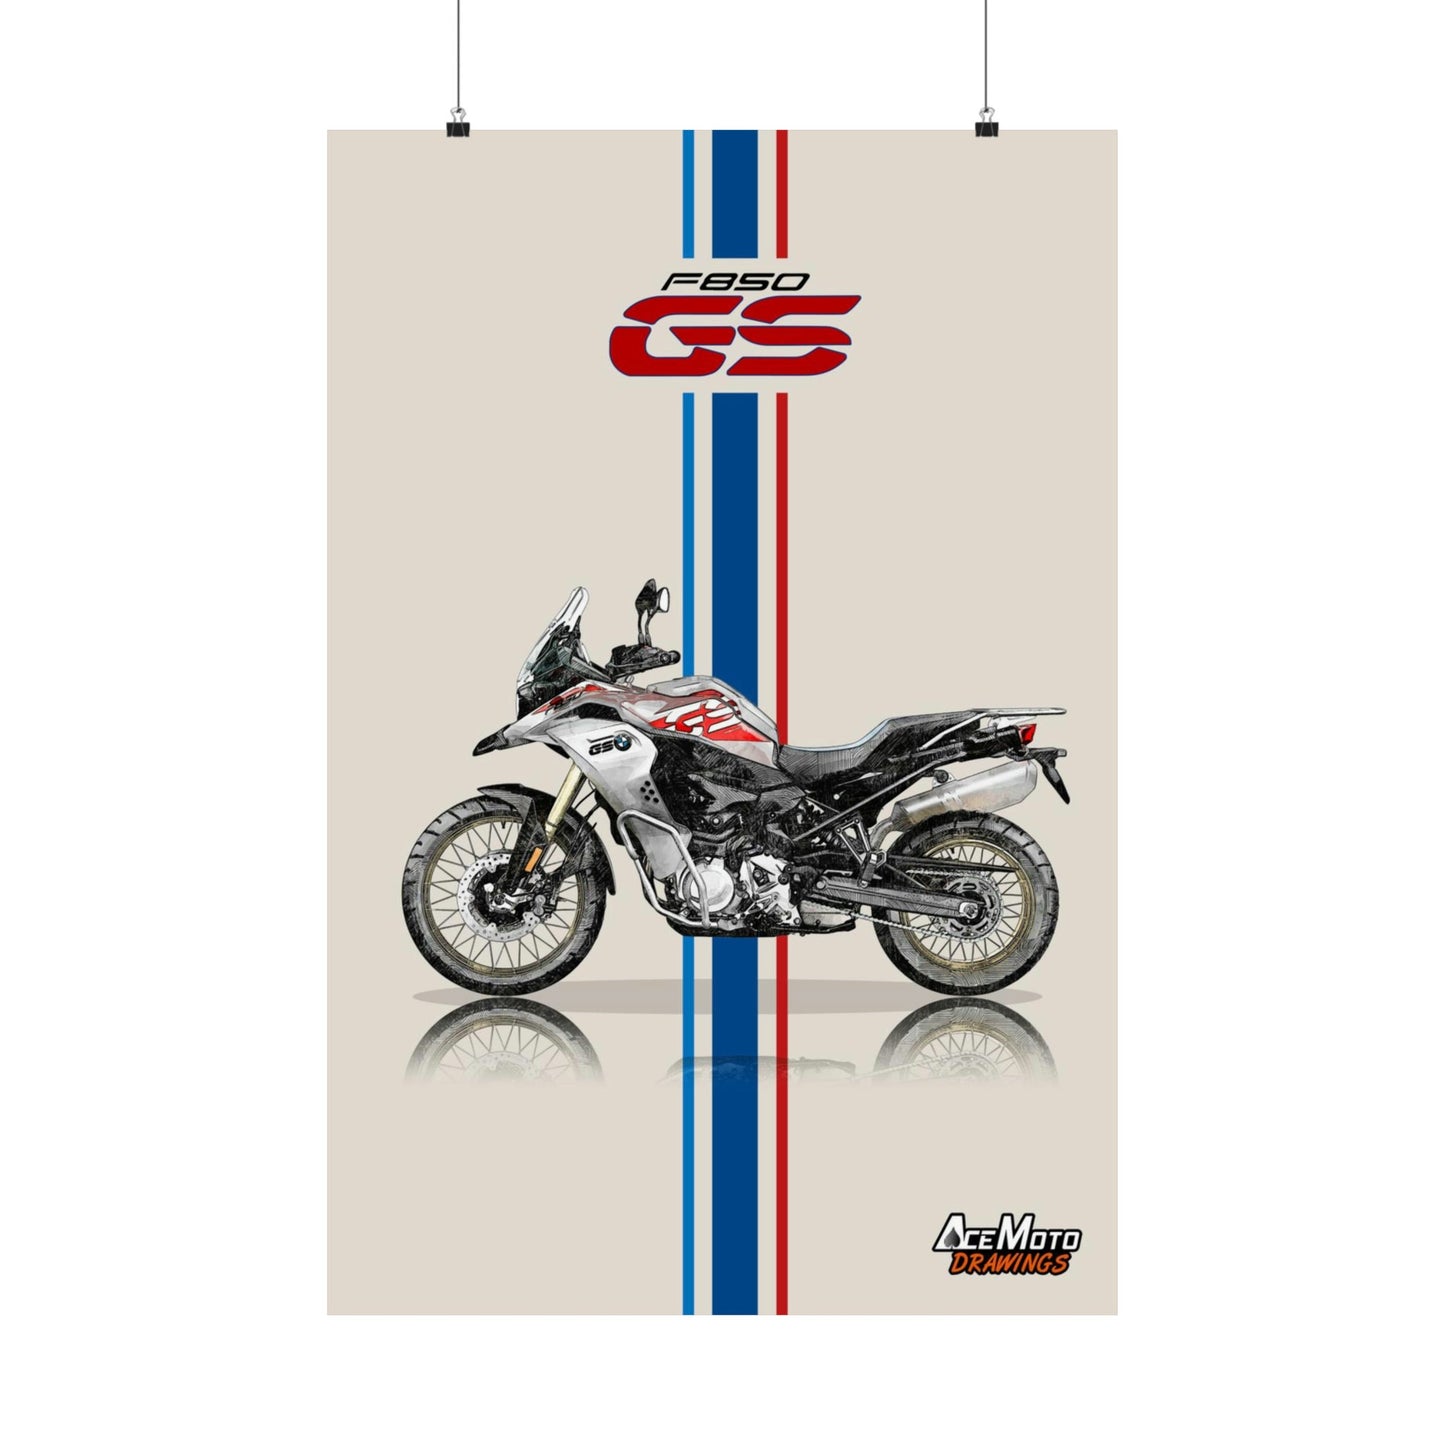 BMW F850 GS Wall Poster | Motorcycle Poster, Bike Wall Art Decor - Gift for BMW Rider - Drawing